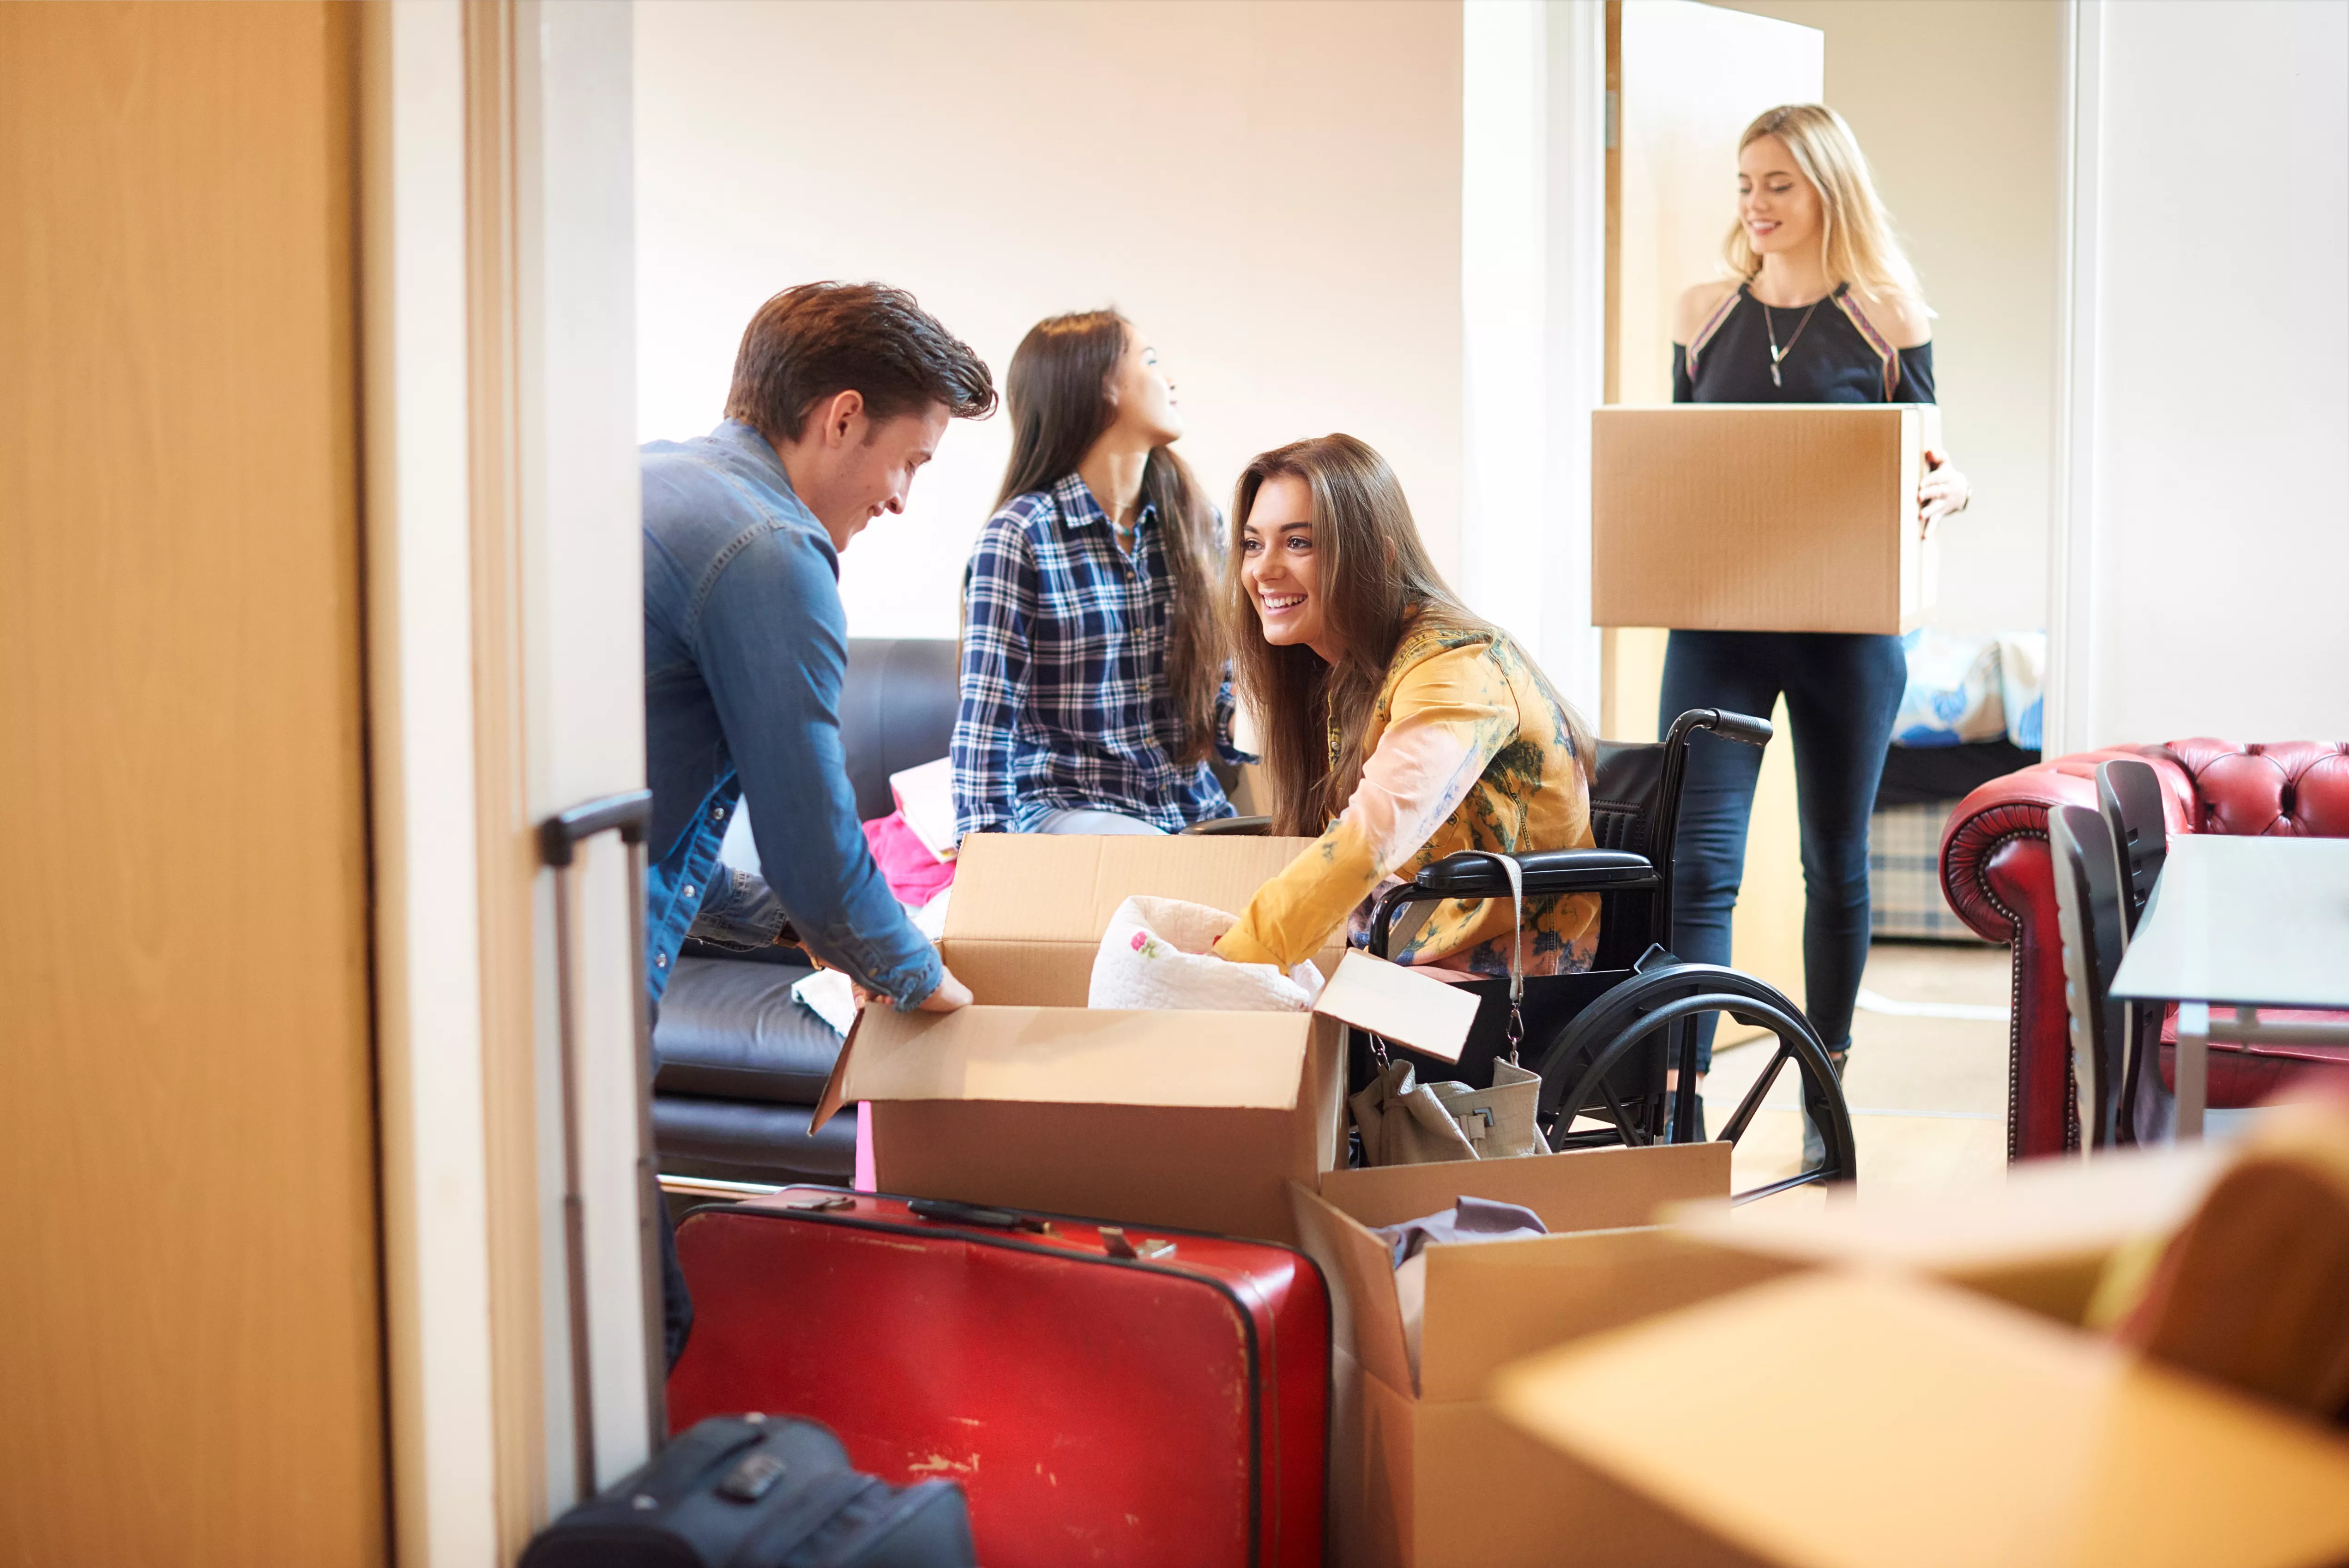 Image of students unpacking boxes as they move into student halls. One is a wheelchair user and she is in focus as she smiles at another student